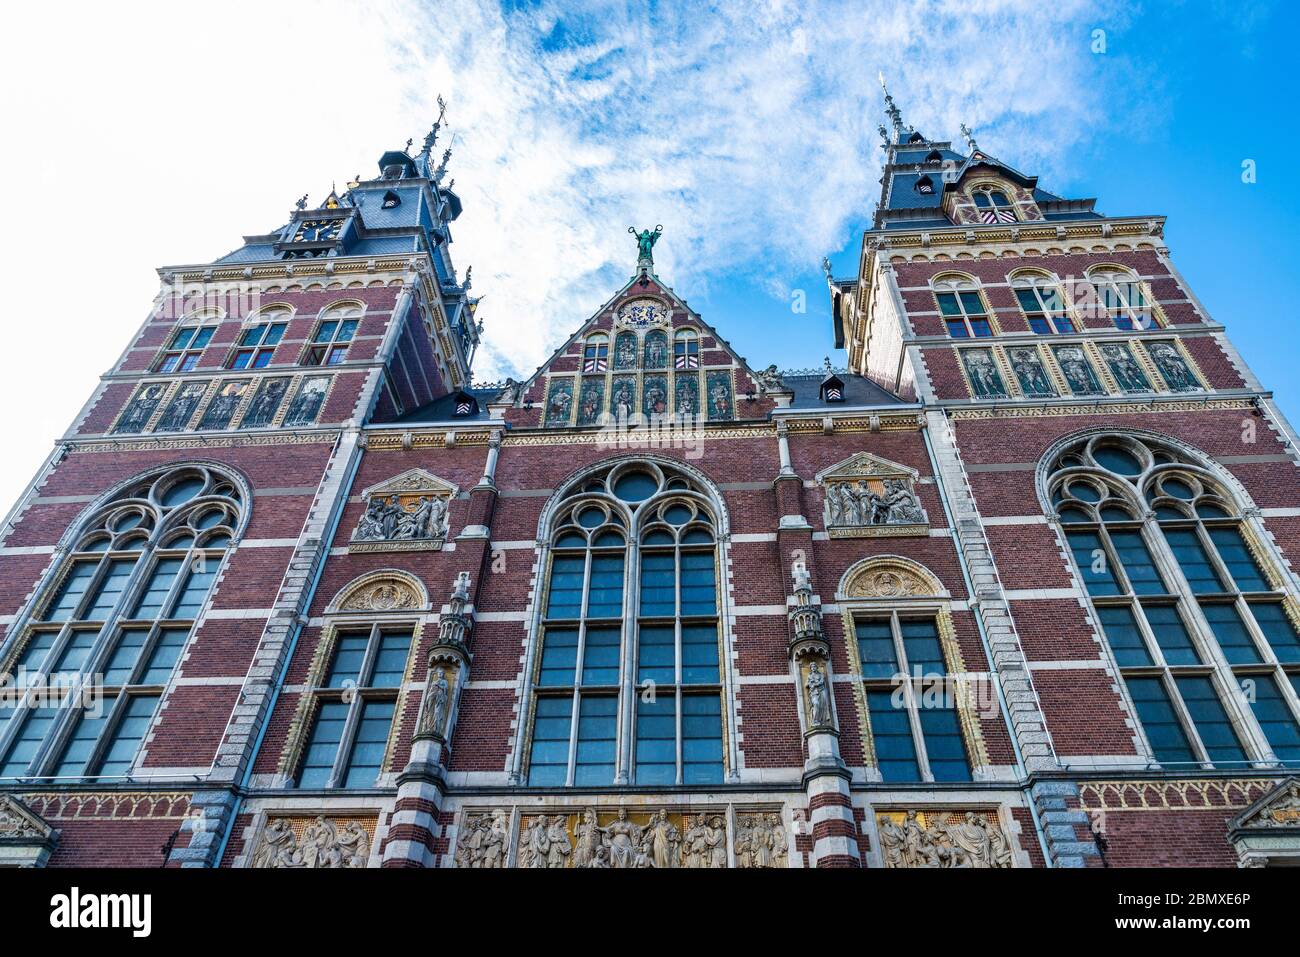 Facade of the Rijksmuseum (National Museum) in Amsterdam, Netherlands Stock Photo